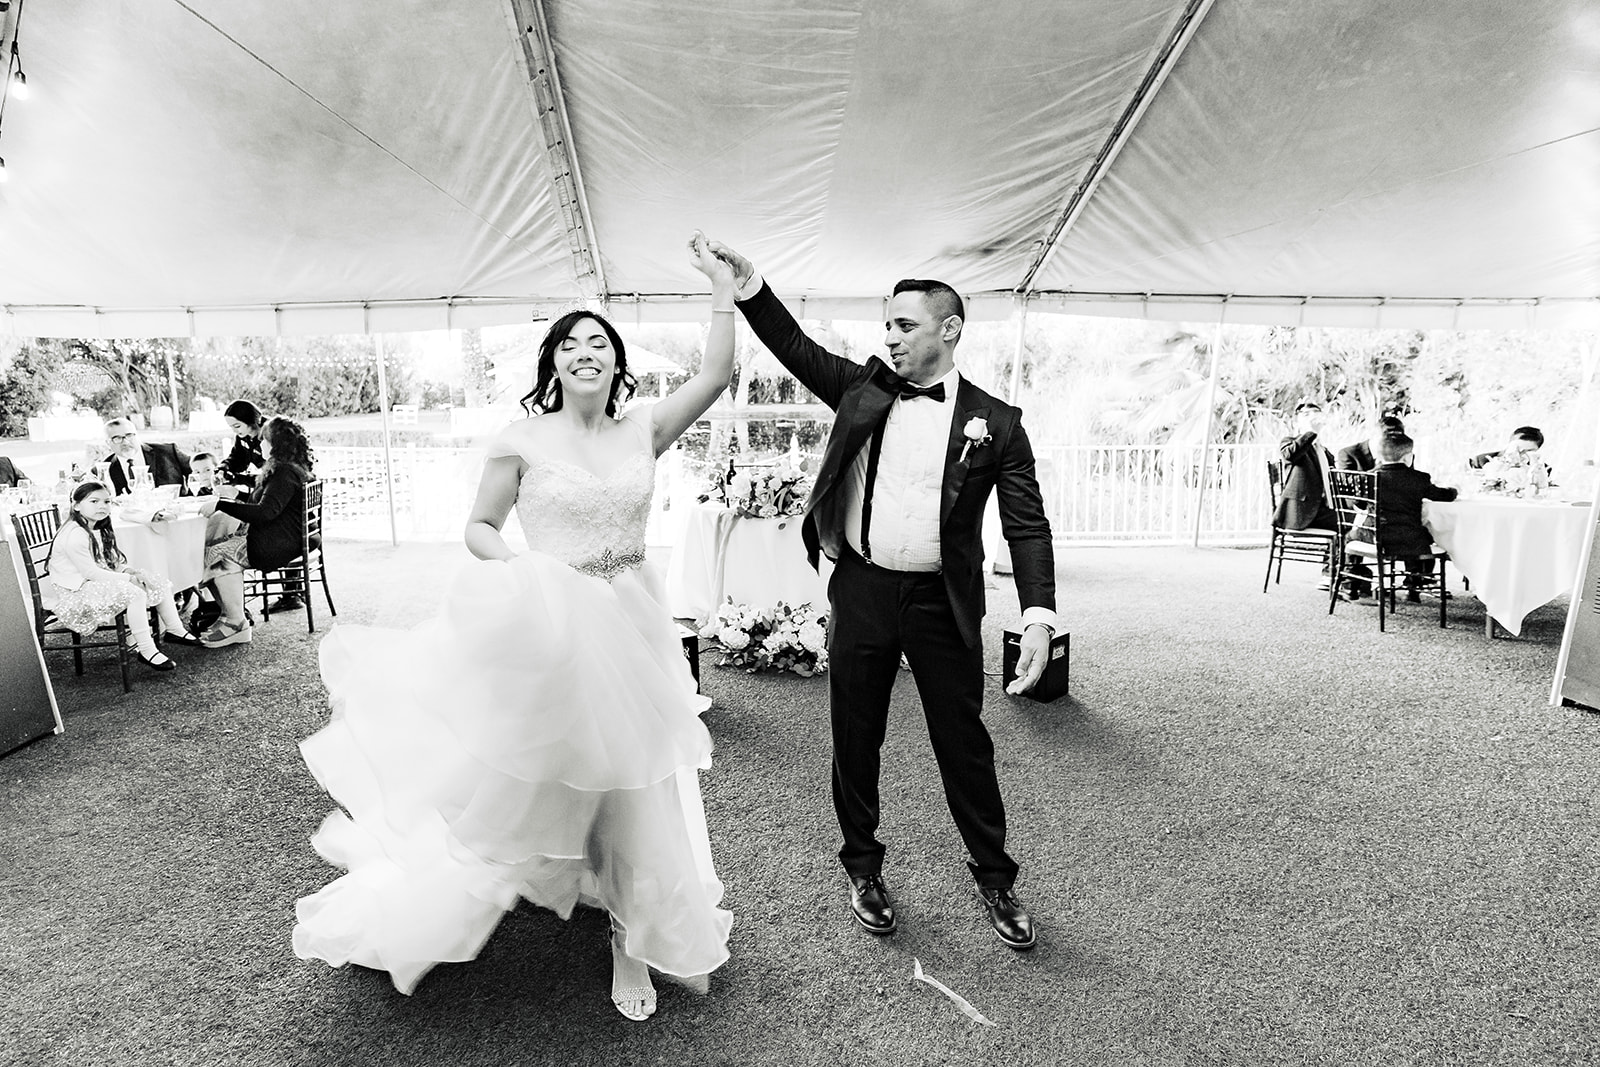 Newlywed's first dance under reception tent at The Orchard, Menifee, CA